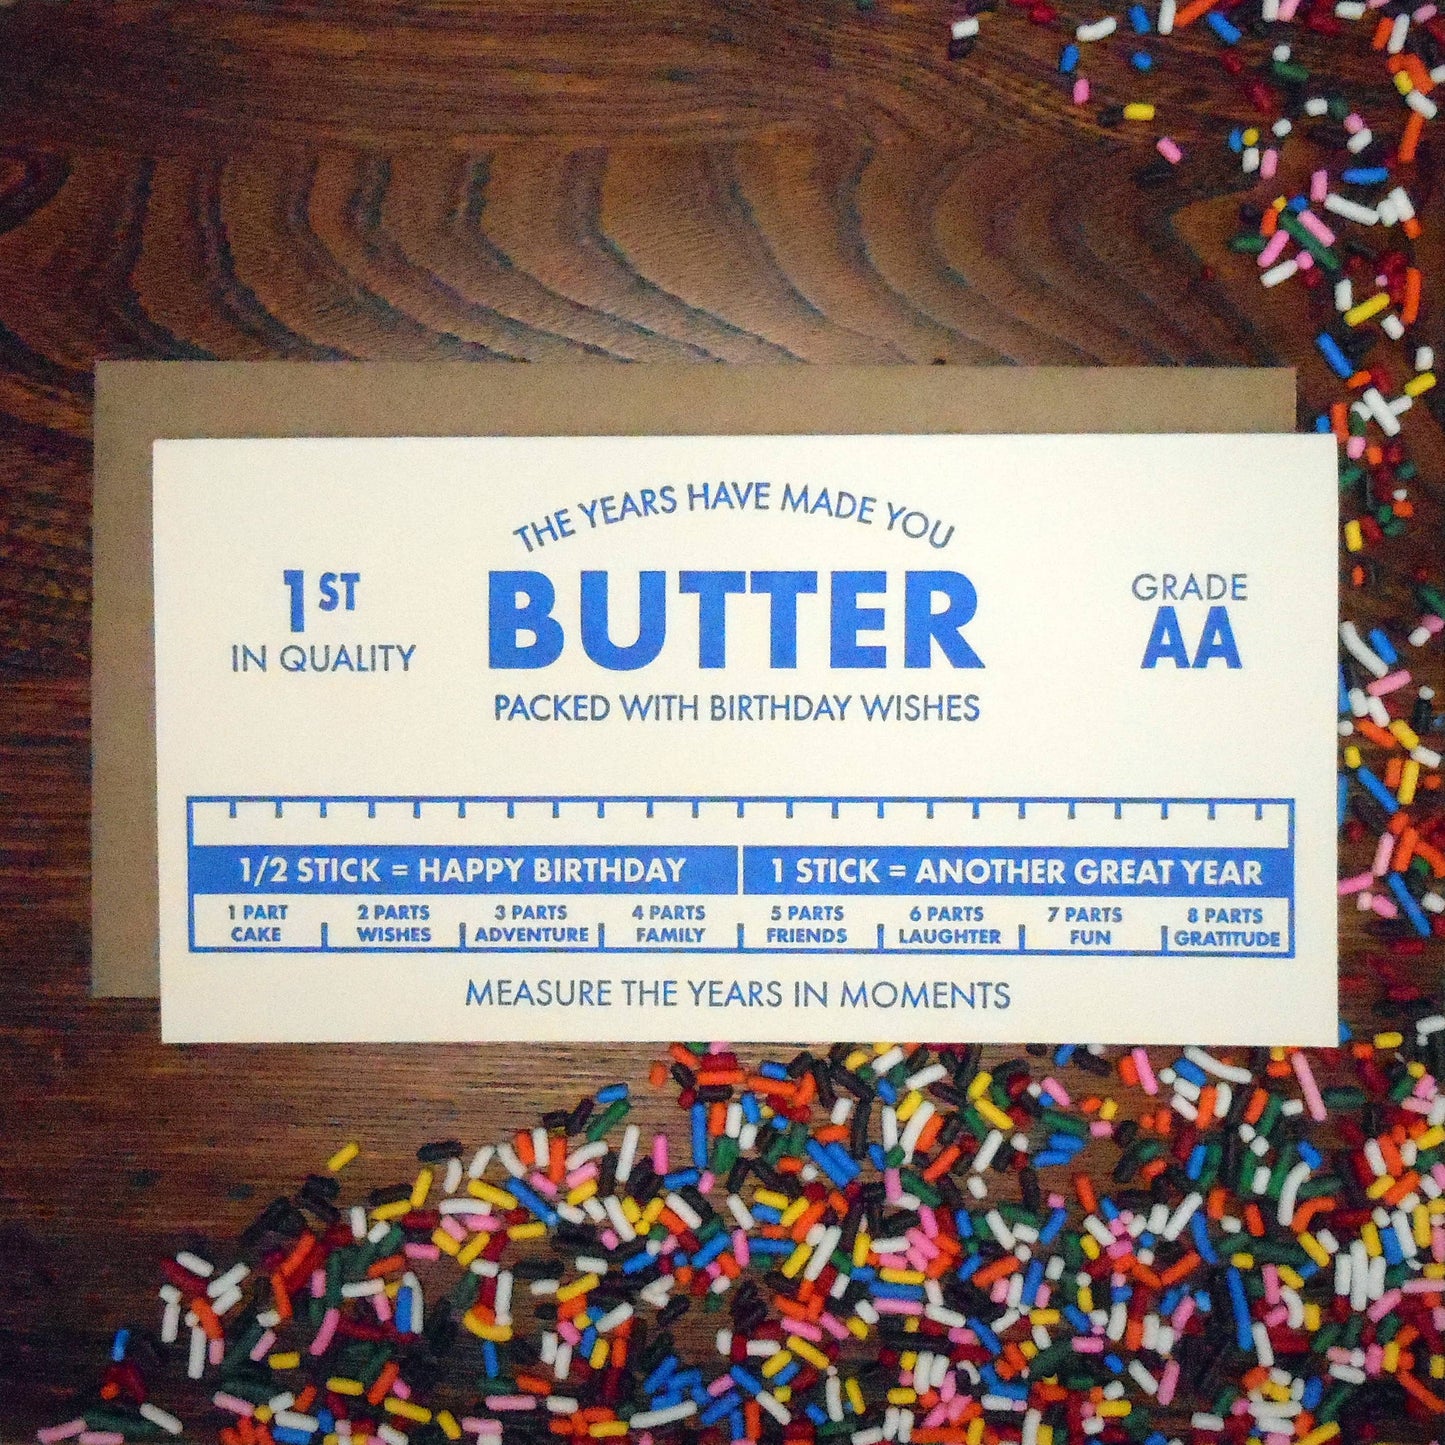 the years have made you butter Card